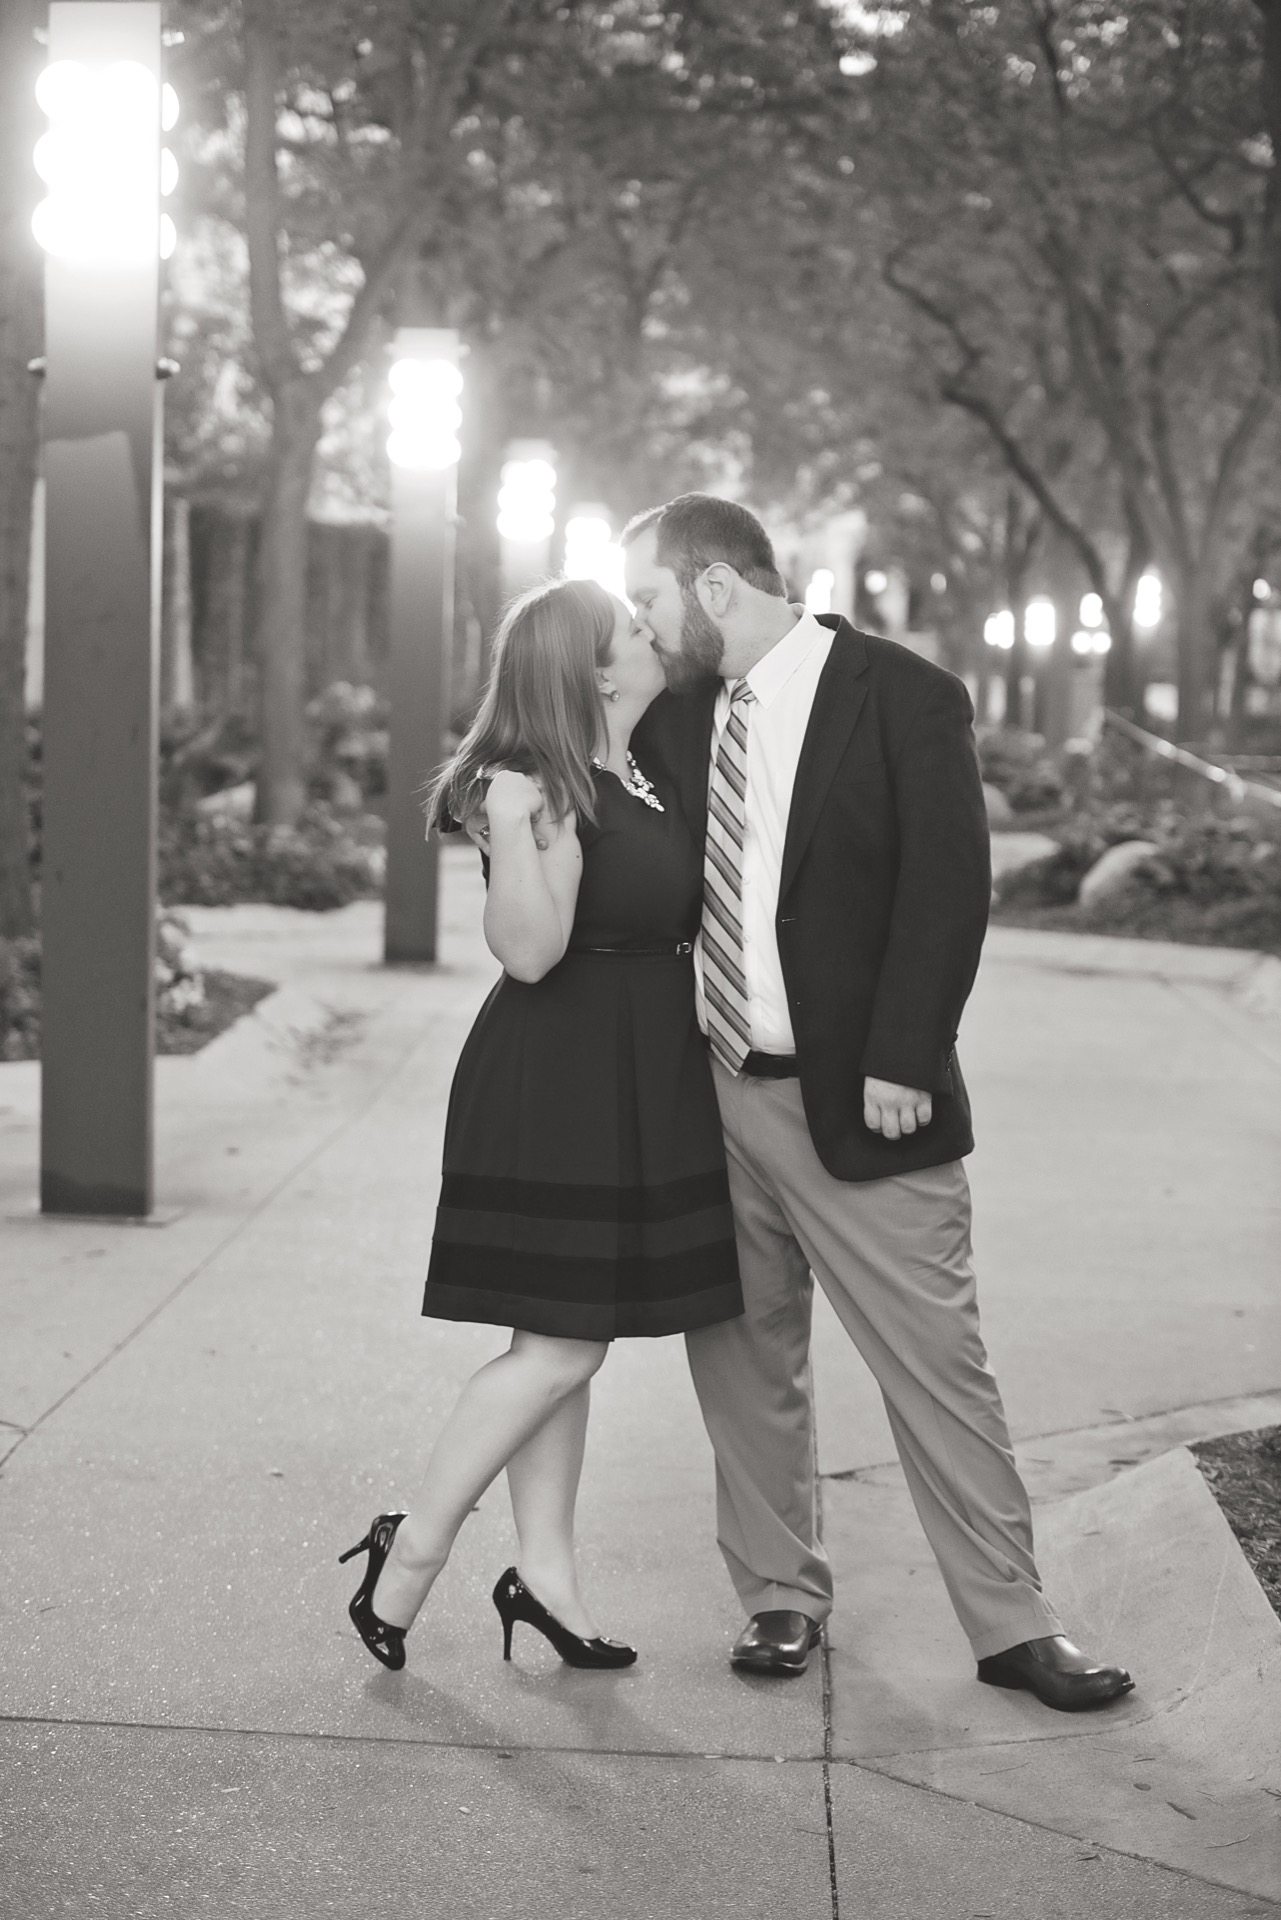 An engagement photo of Caitlin and Wyatt